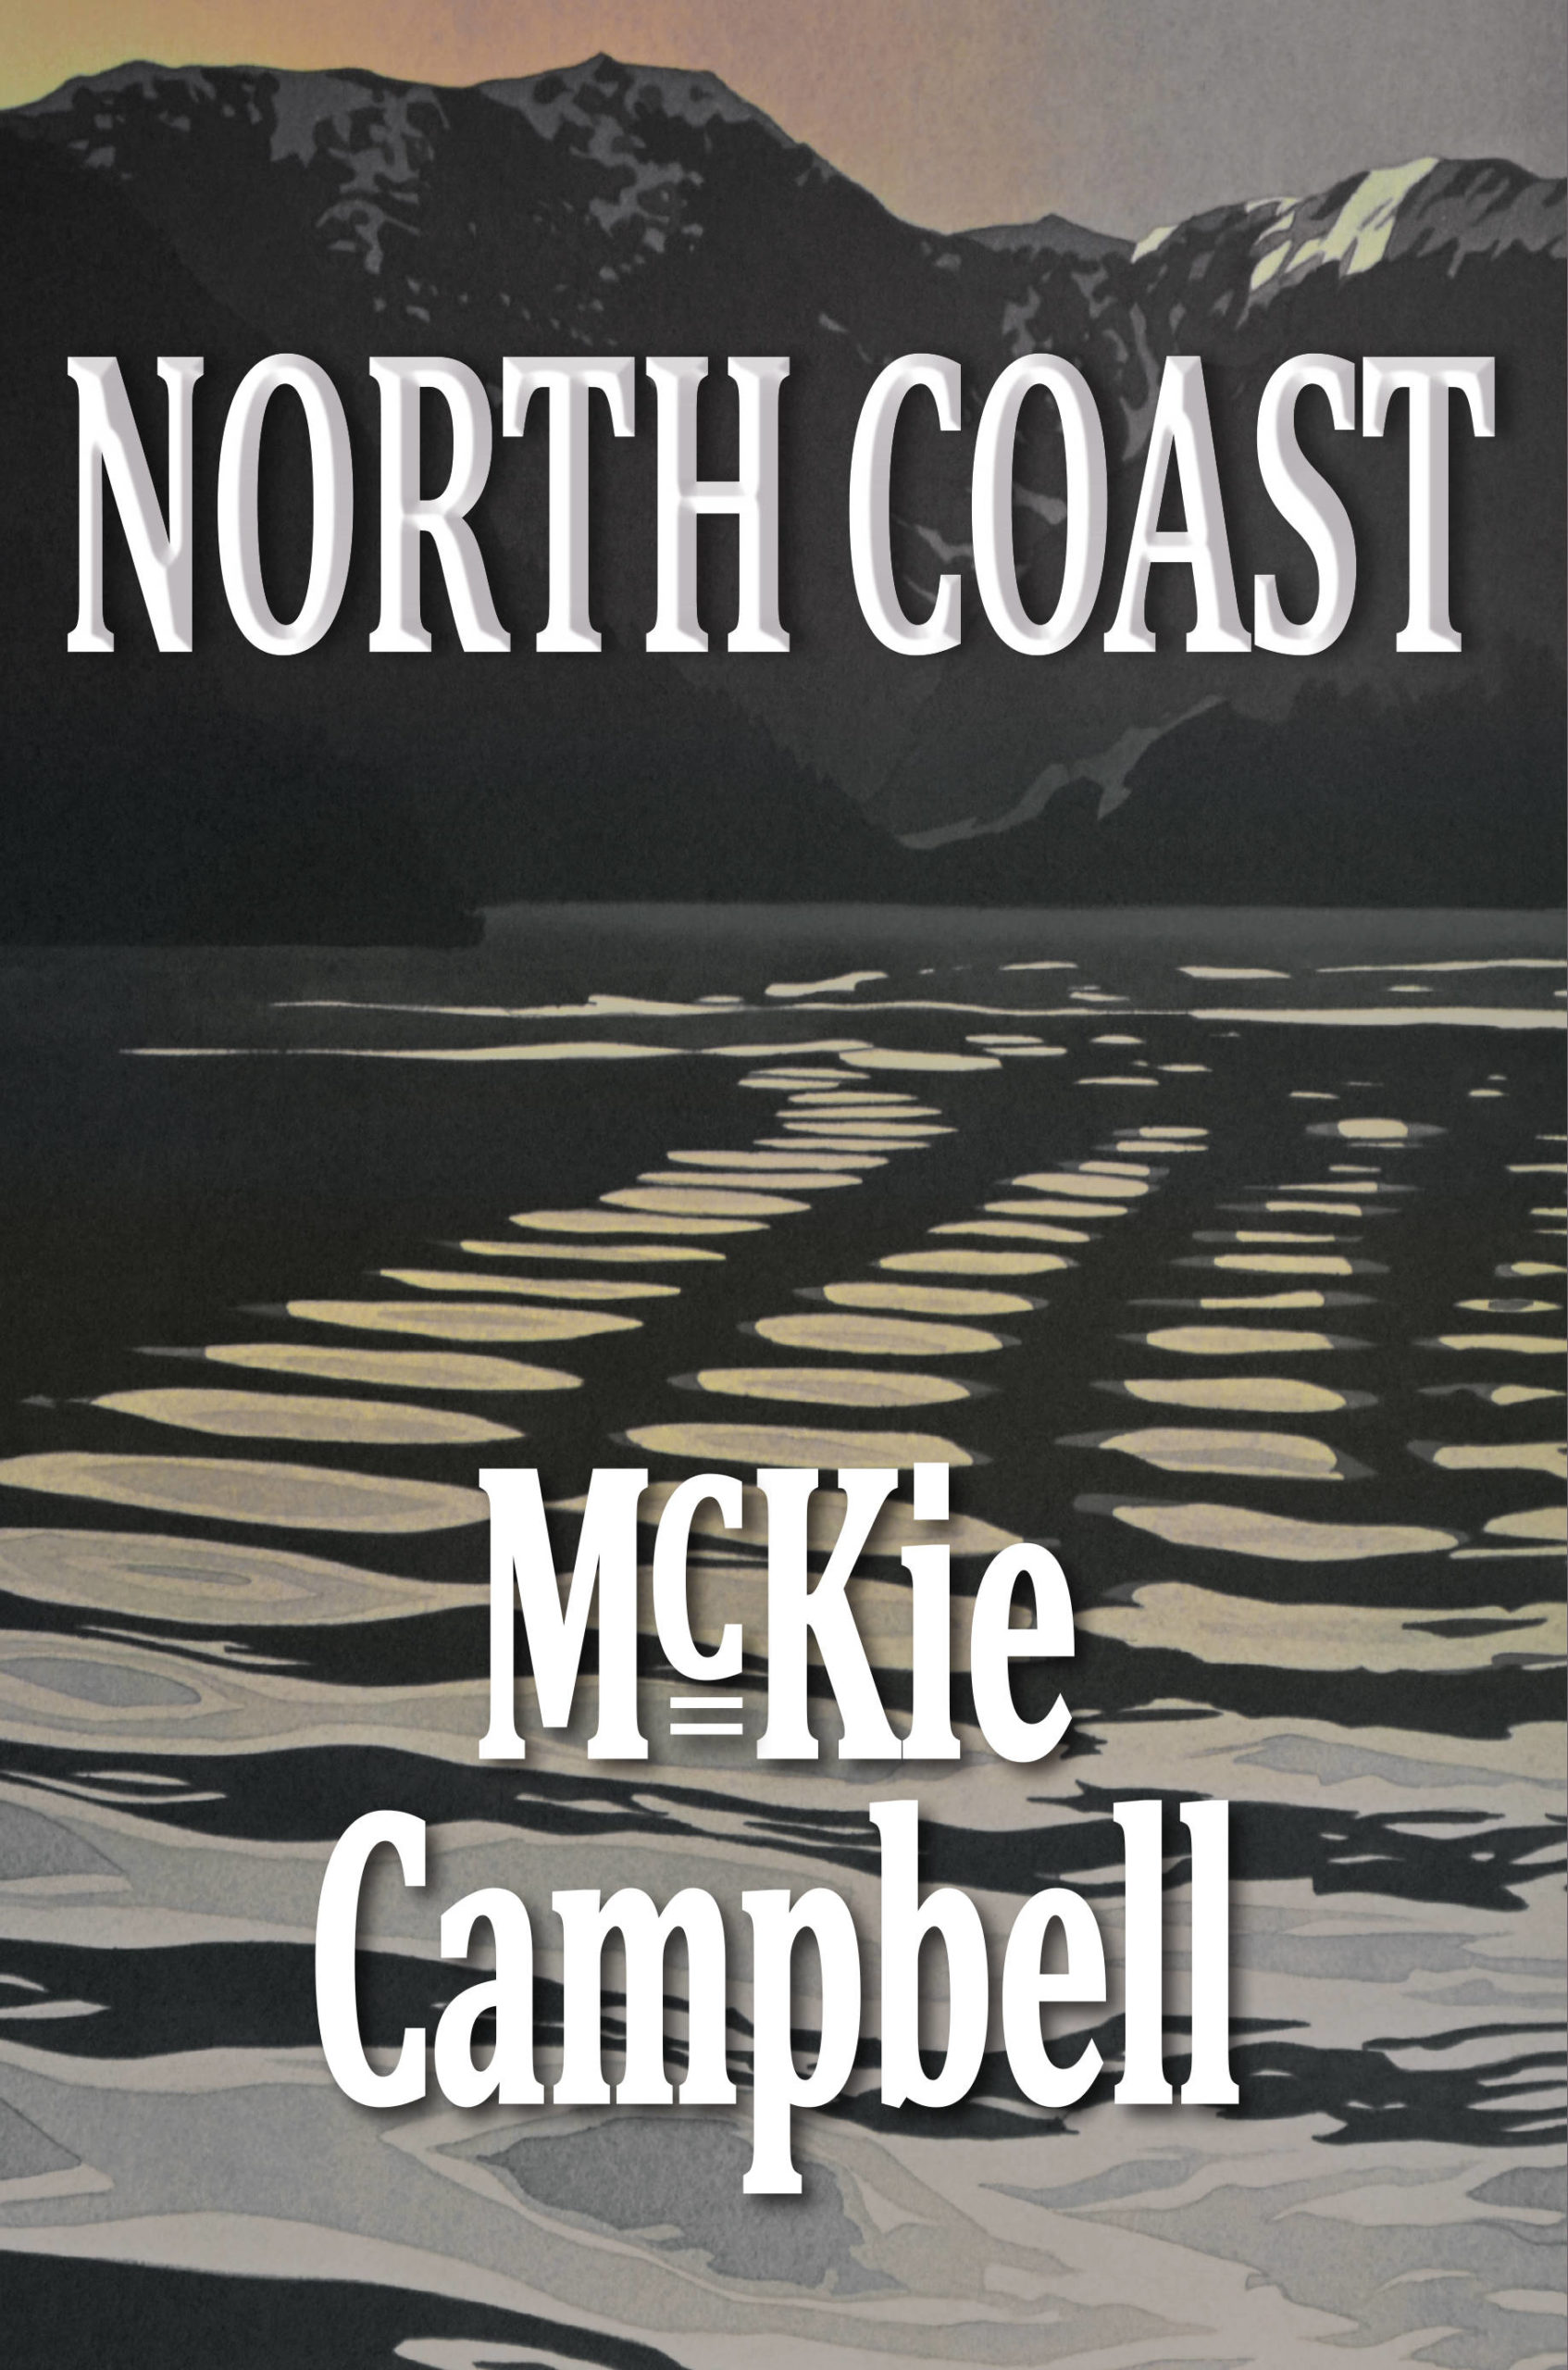 This image shows the cover to McKie Campbell’s book “North Coast.” (Courtesy Image)